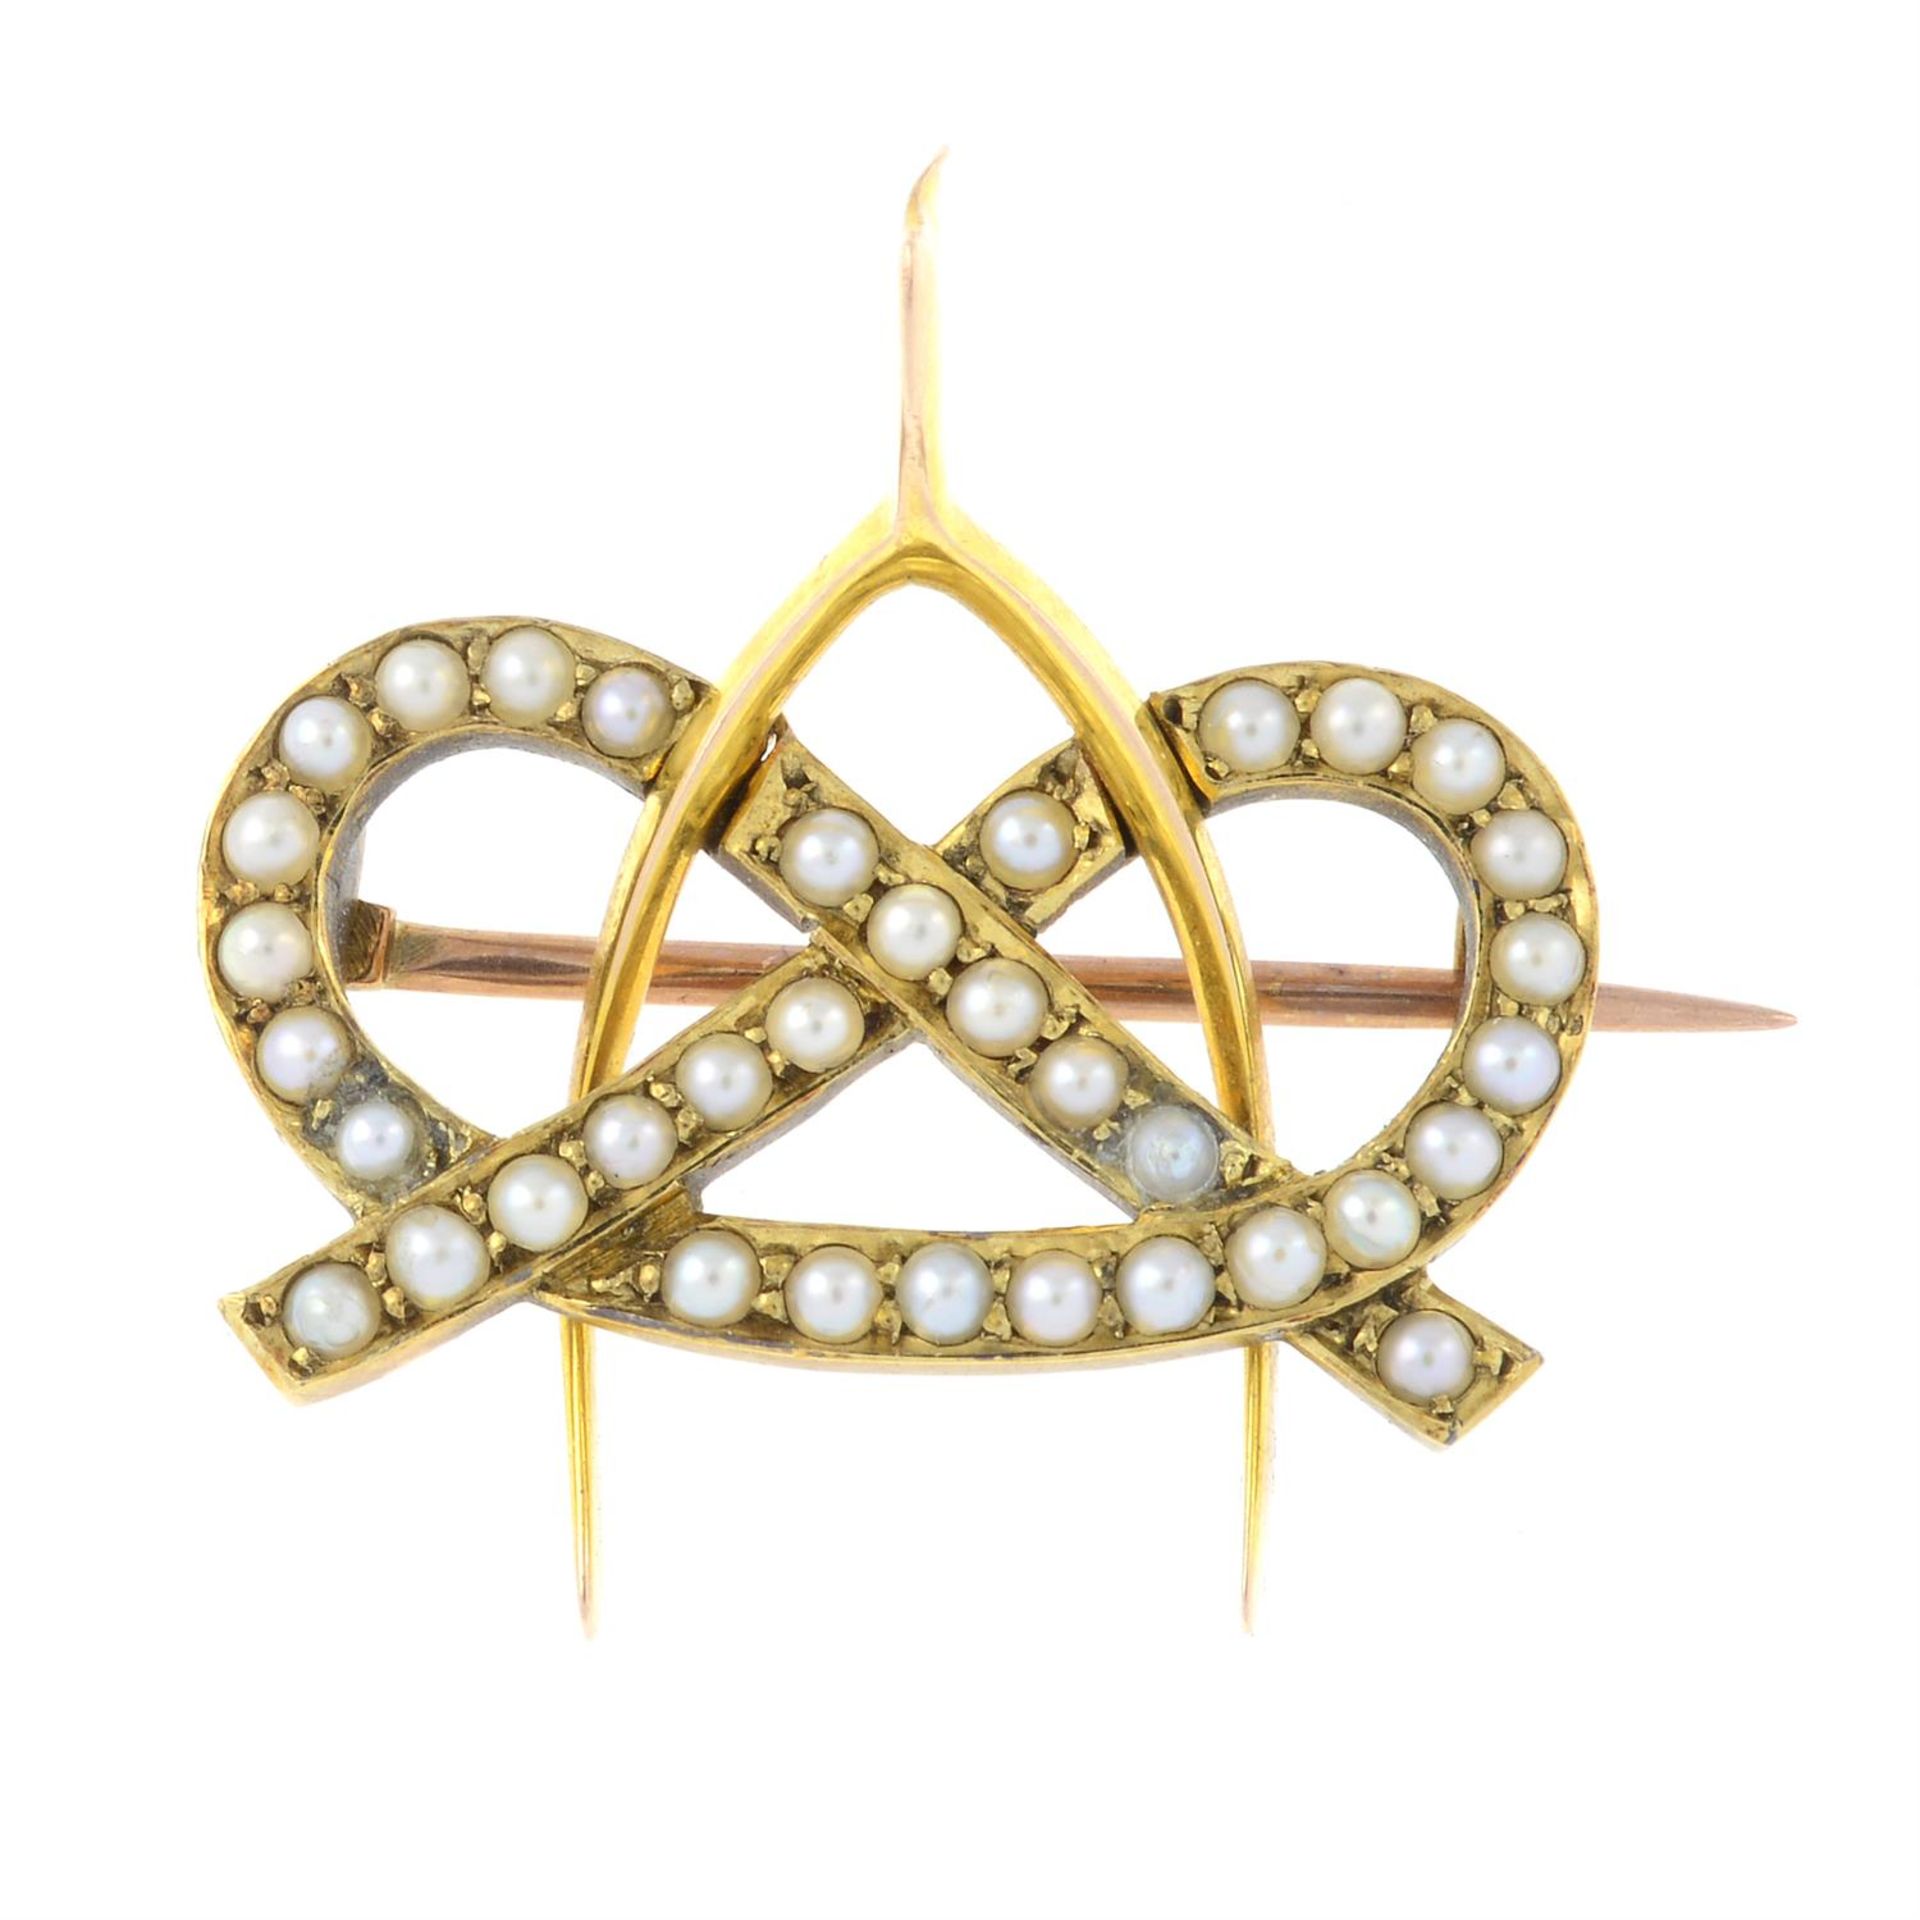 A late Victorian 15ct gold seed pearl lovers knot wishbone brooch.